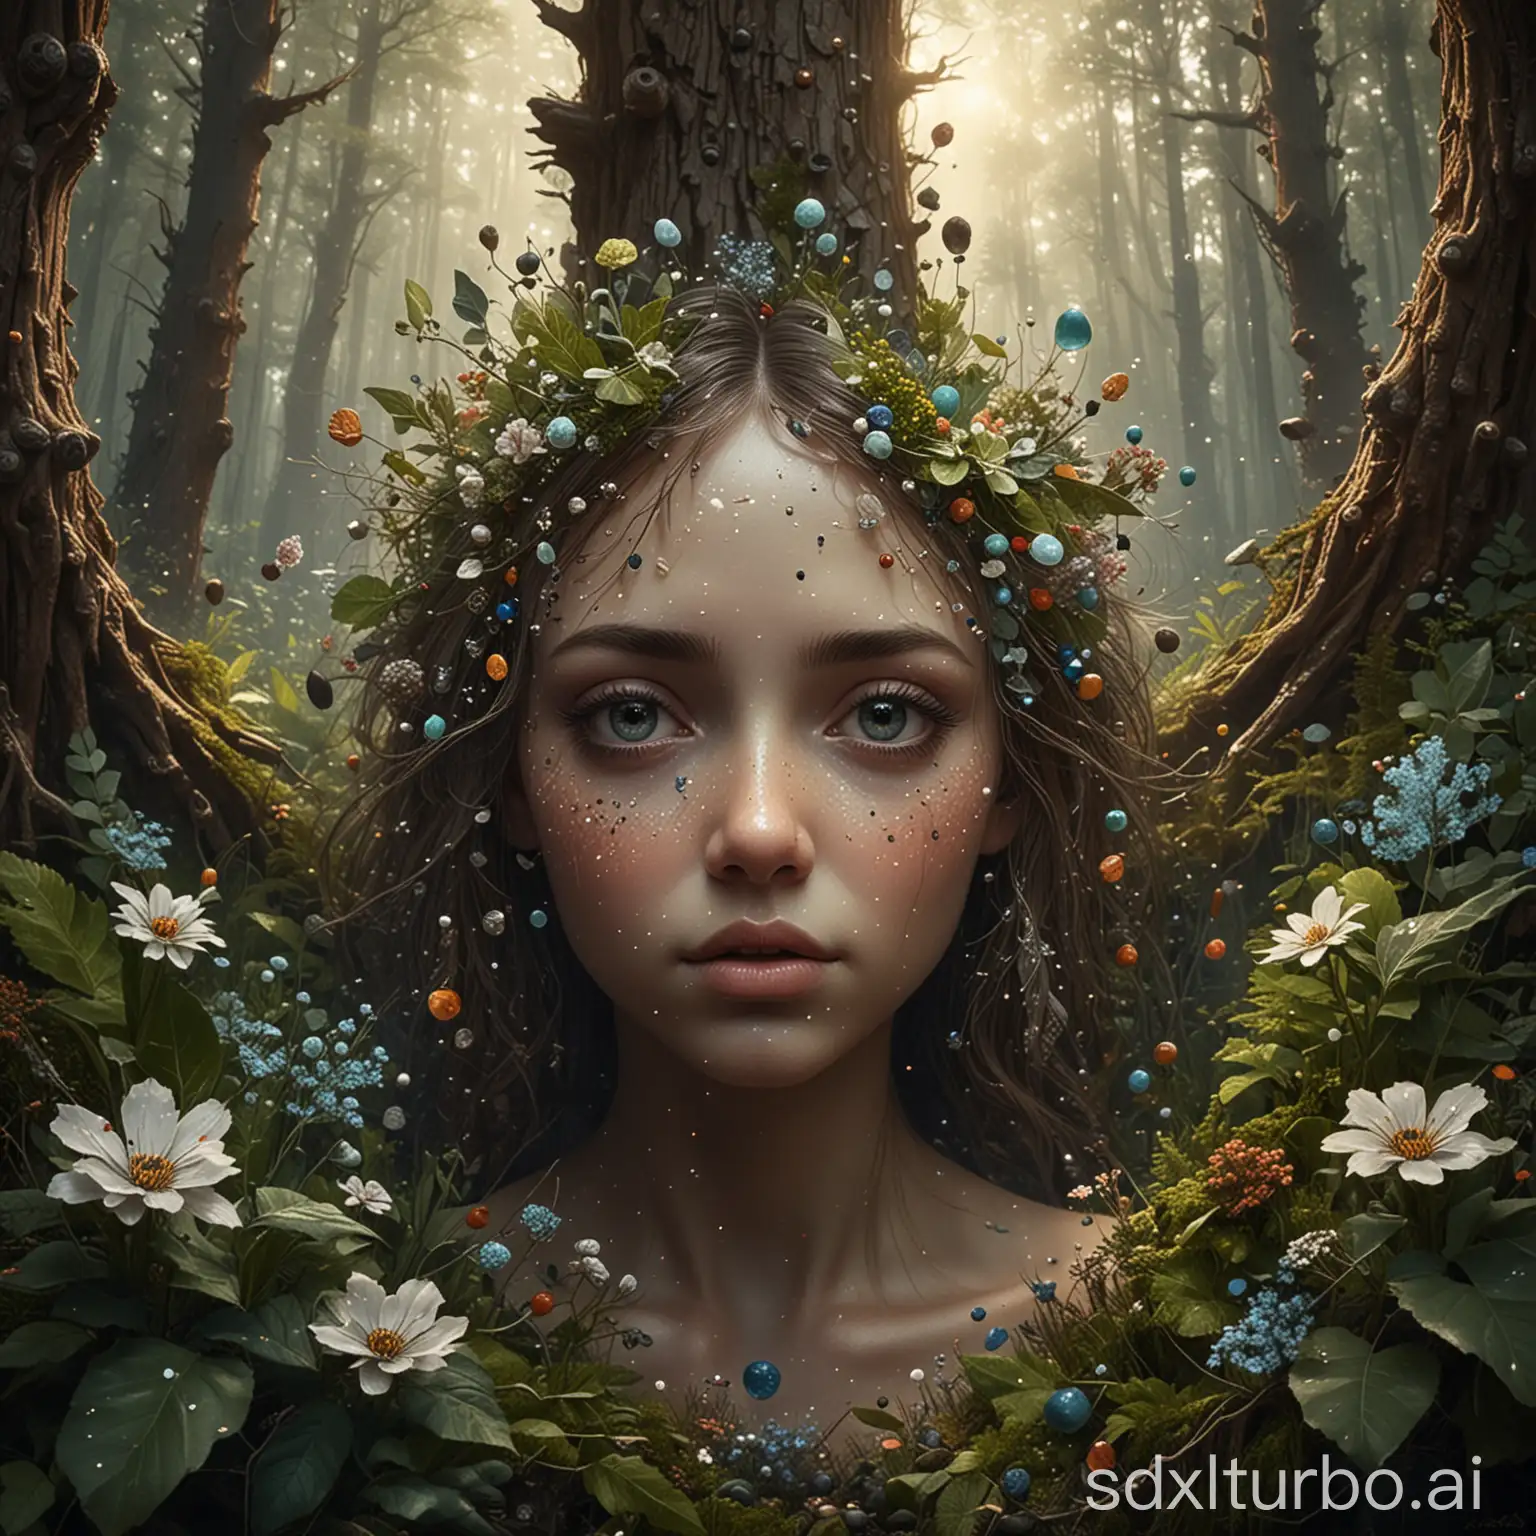 Ritualistic-Forest-Girl-Surrounded-by-Gemstones-and-Crystals-Double-Exposure-Oil-Painting